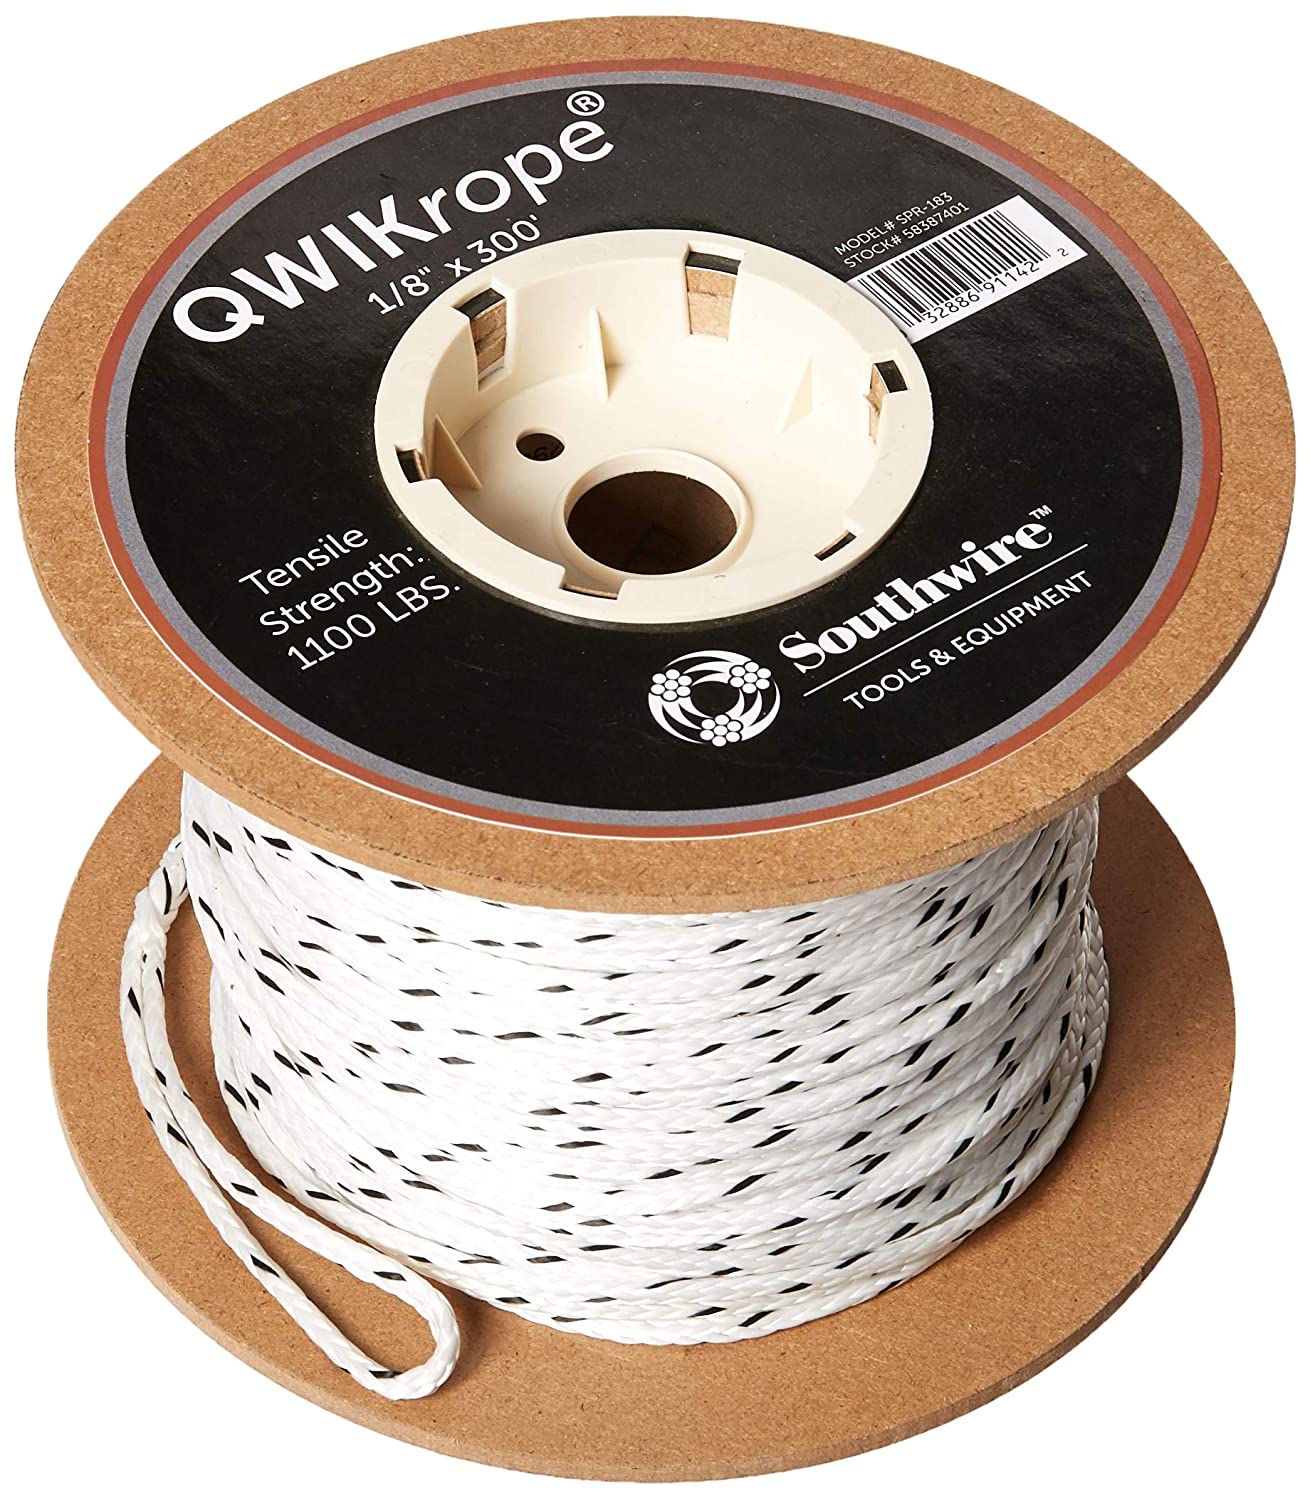 Southwire SPR-186 SIMRope 1/8 in x 600 ft